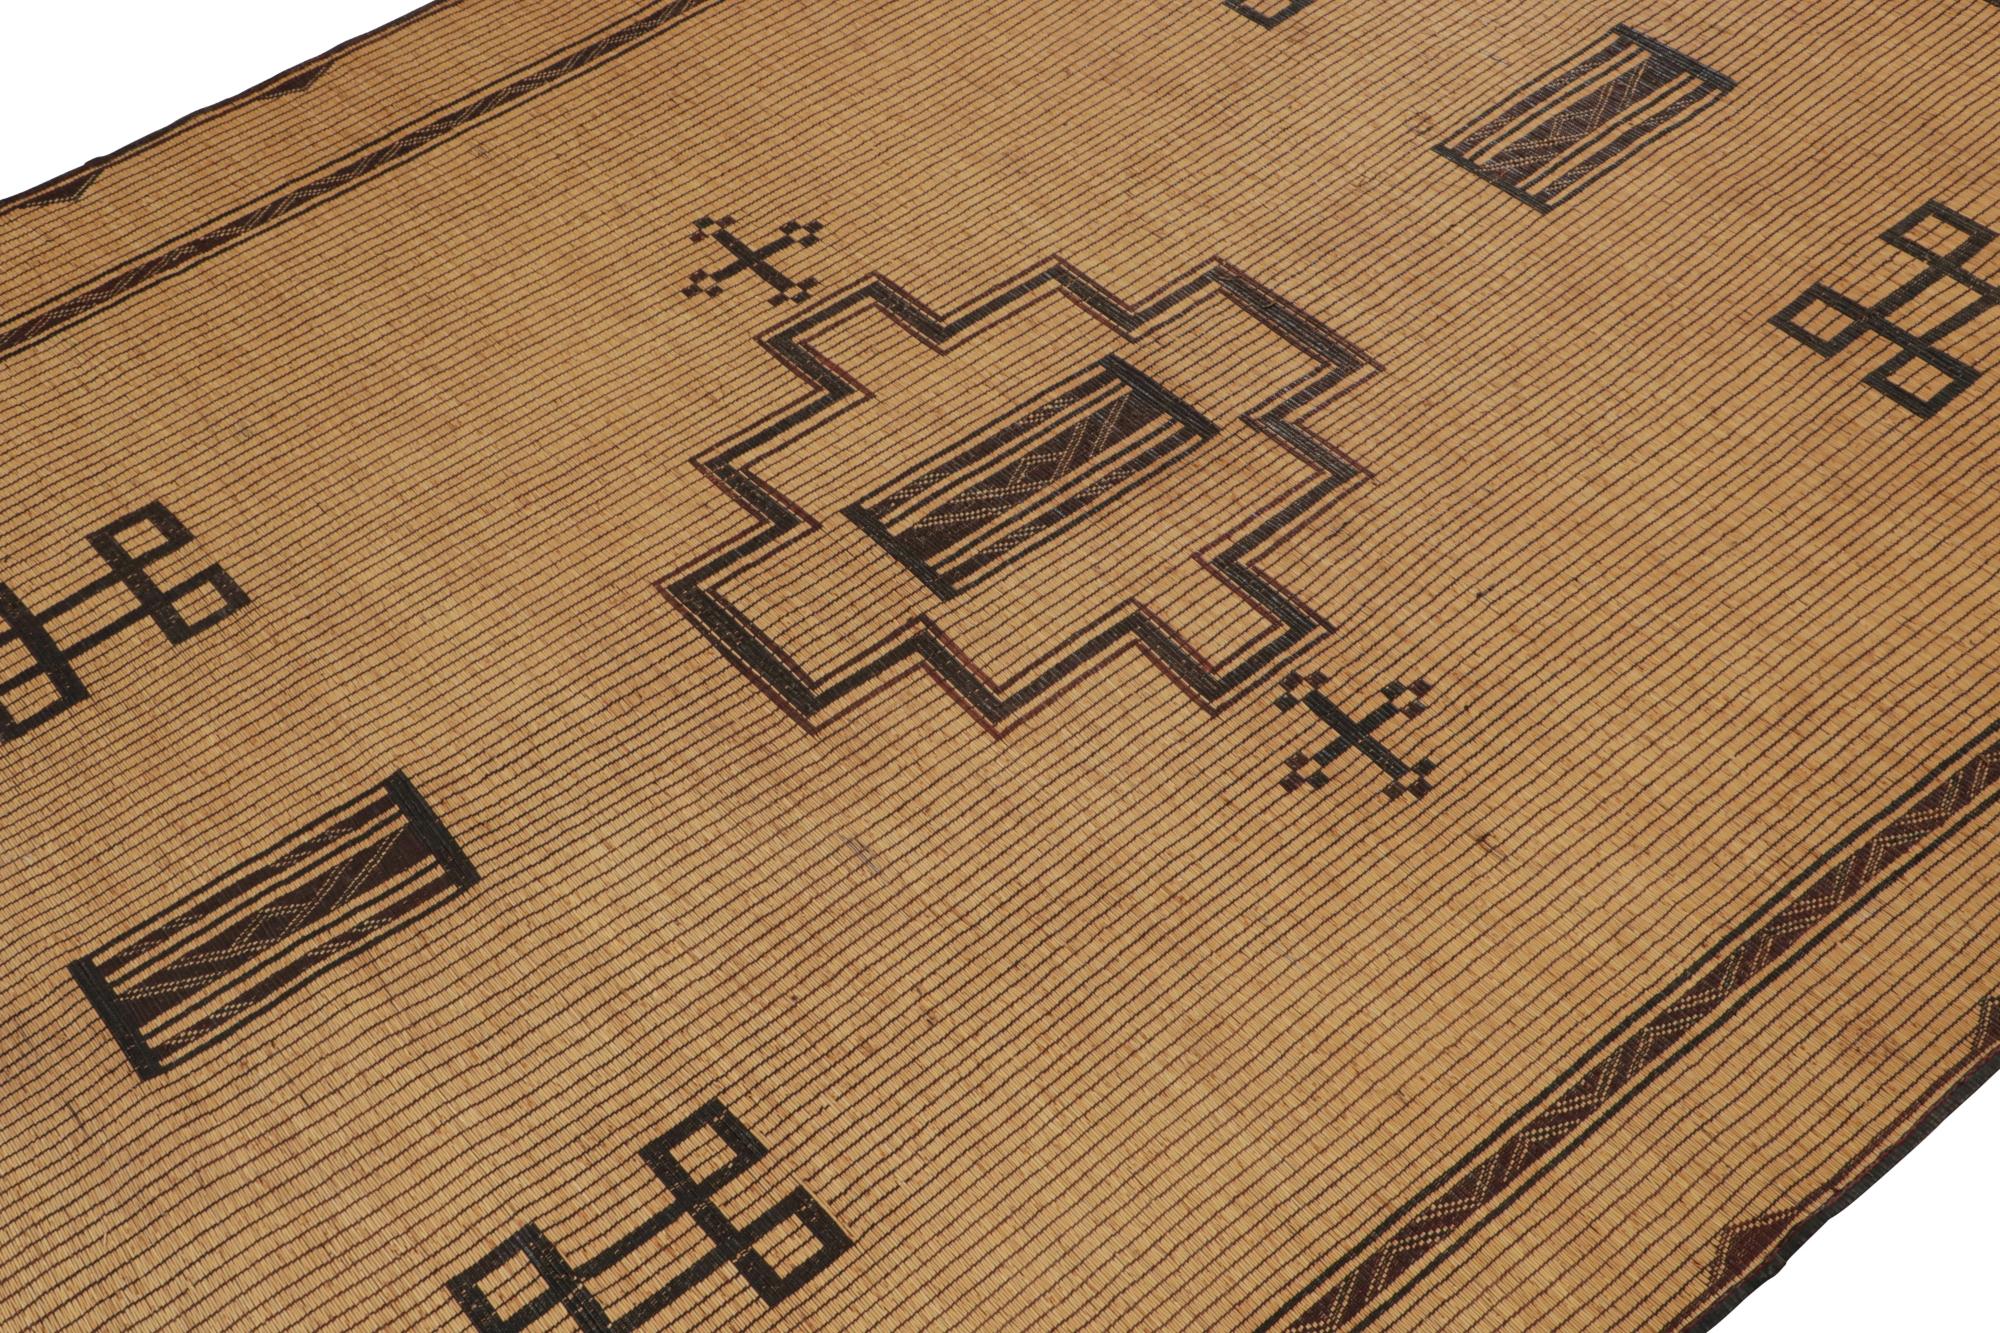 This vintage Moroccan floor covering is a 9x13 Tuareg mat from the nomadic tribe of the same name. Handwoven with reeds and leather circa 1950-1960, its natural materials enjoy warm beige, brown and black tones, with rich burgundy accents in its